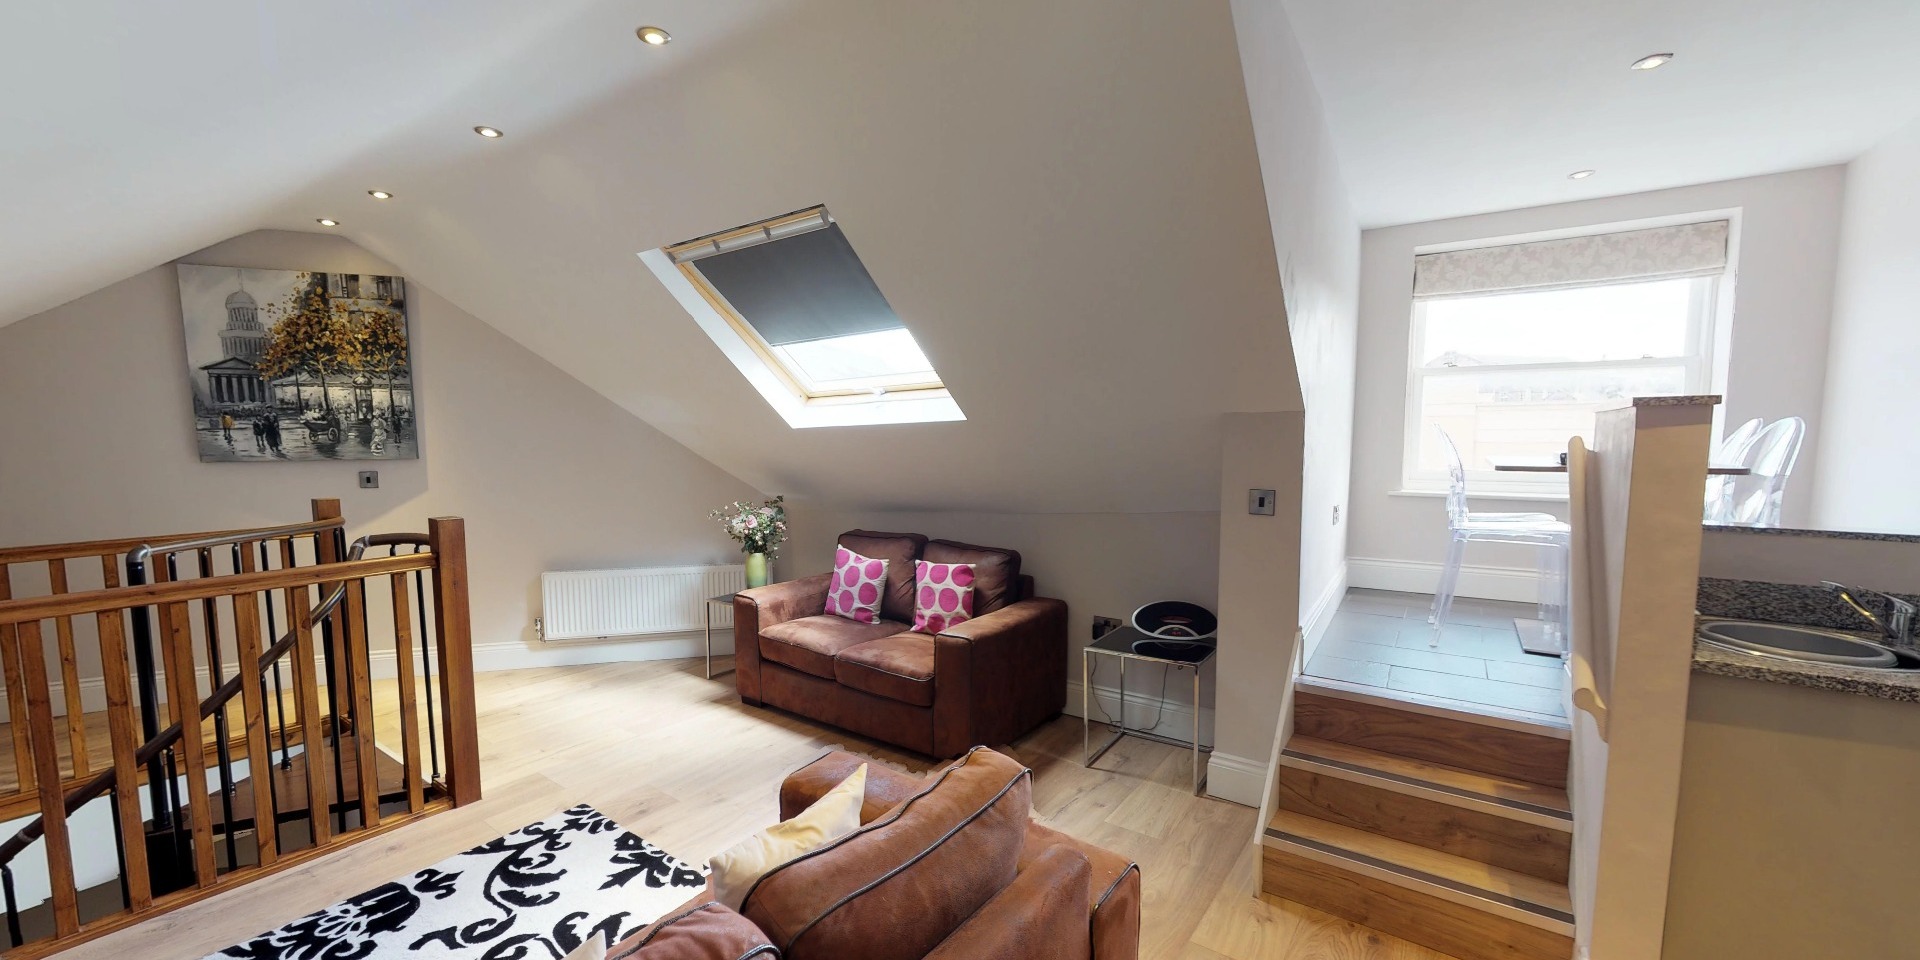 Harrogate Lifestyle offers stylish two bedroom one bathroom apartment for up to 4 people with double or twin bed set up facility. For Bookings Call now - 01423 568820